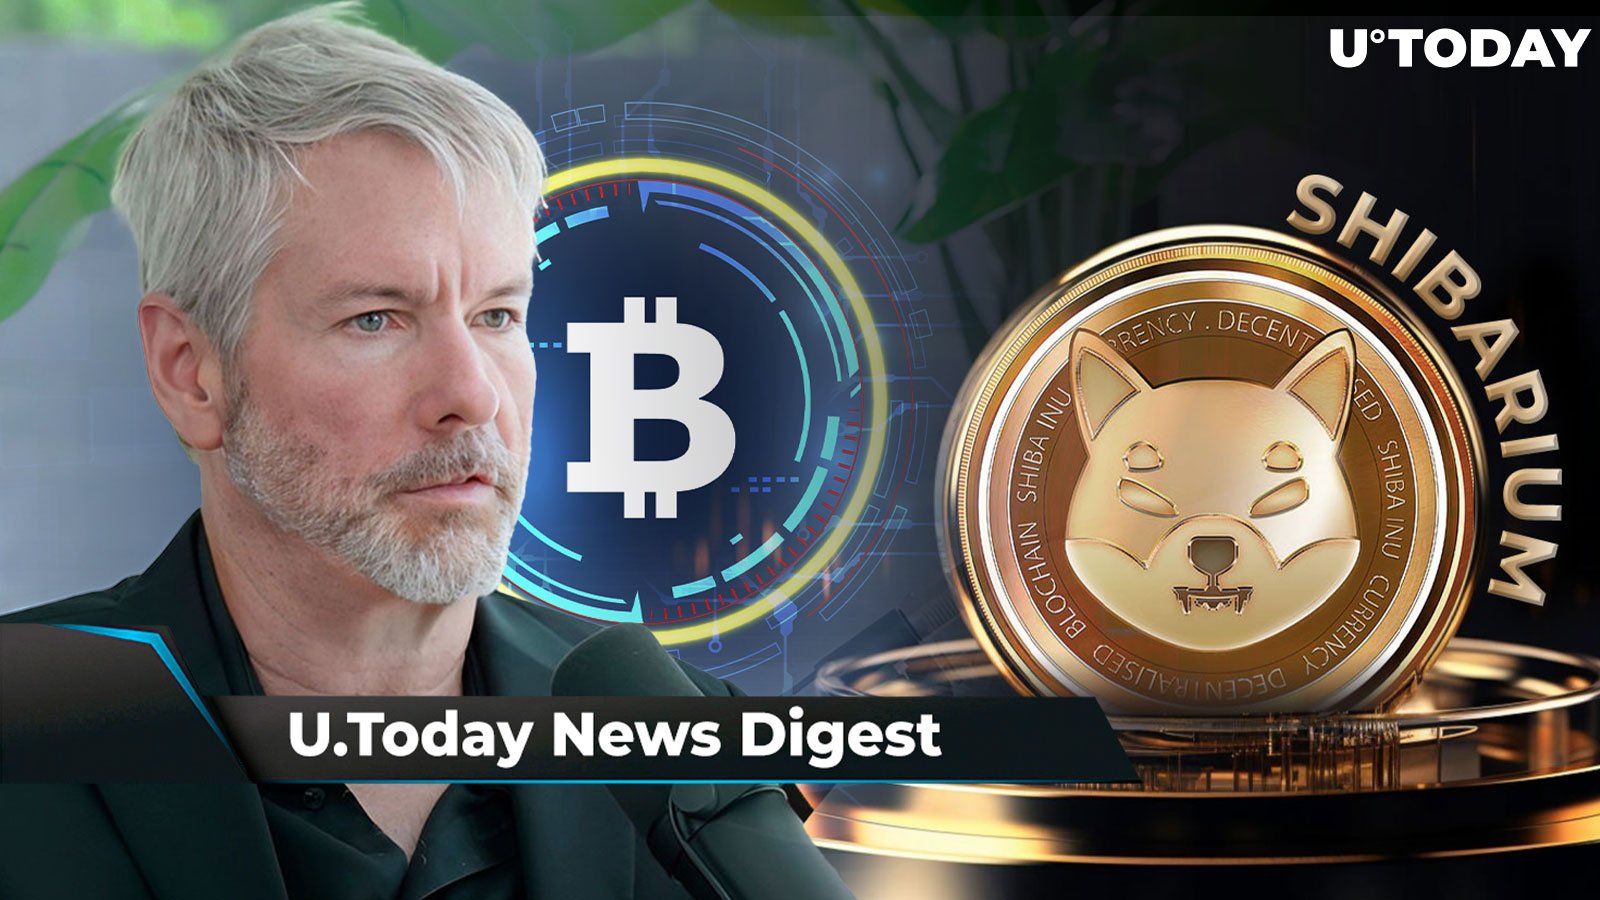 BlackRock to Become BTC Biggest Holder, Analyst Predicts; Michael Saylor Issues Warning for BTC Holders; SHIB Rep Unveils Shibarium's Future: Crypto News Digest by U.Today